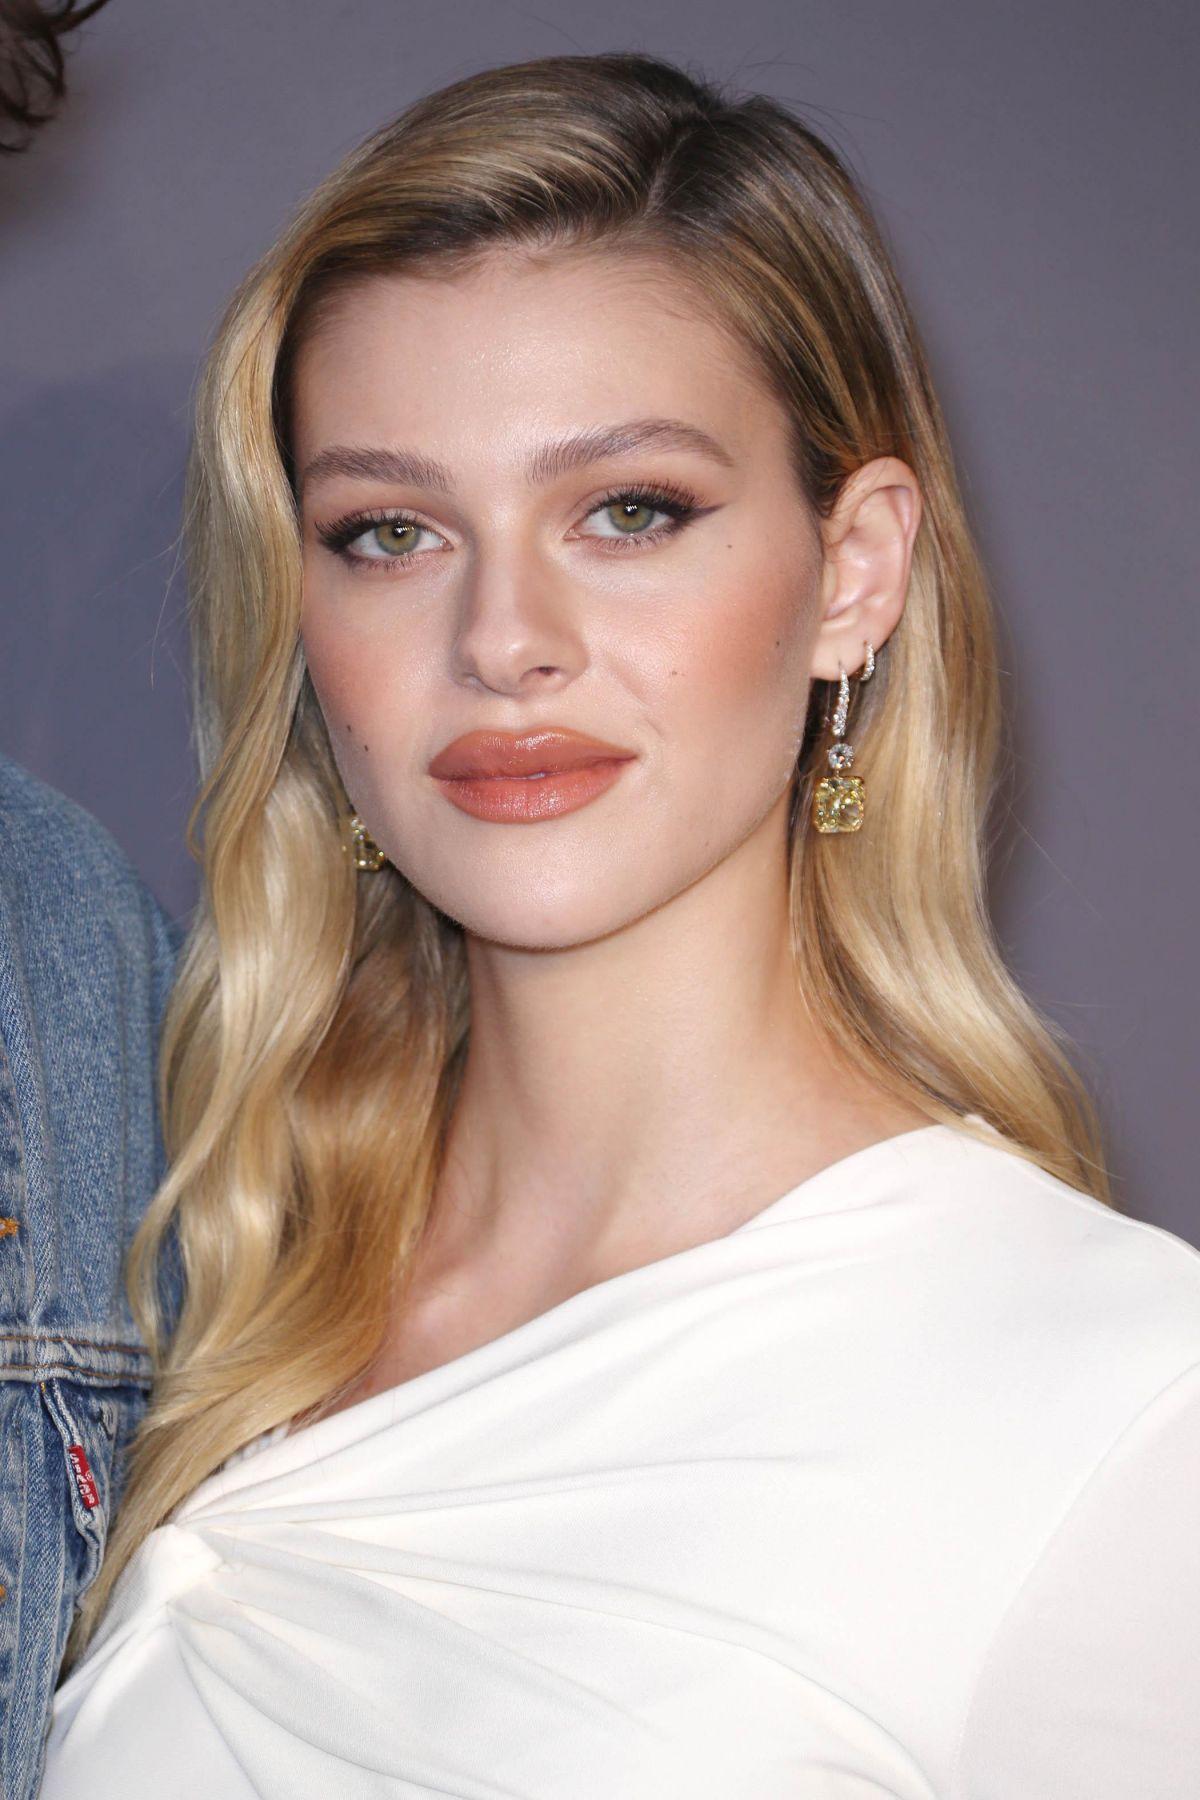 55 Hot Pictures Of Nicola Peltz Will Drive You Insane For Her 236